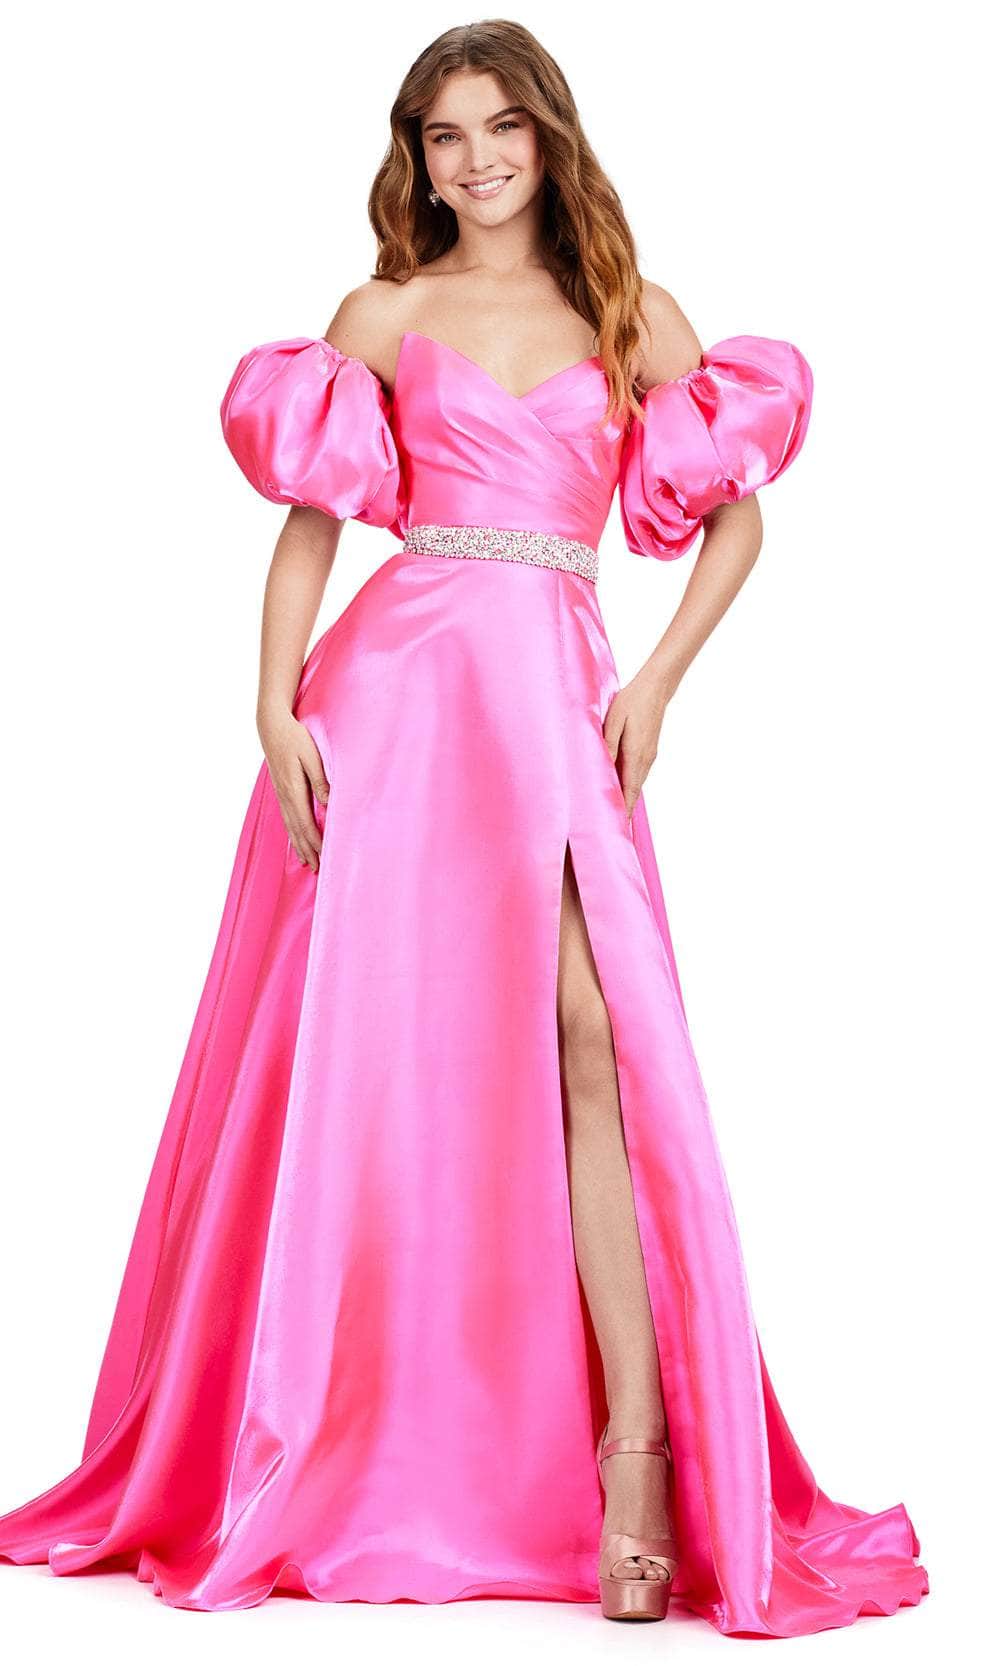 Ashley Lauren 11474 - A-Line Prom Dress with Beaded Belt Ball Gowns 0 /  Hot Pink